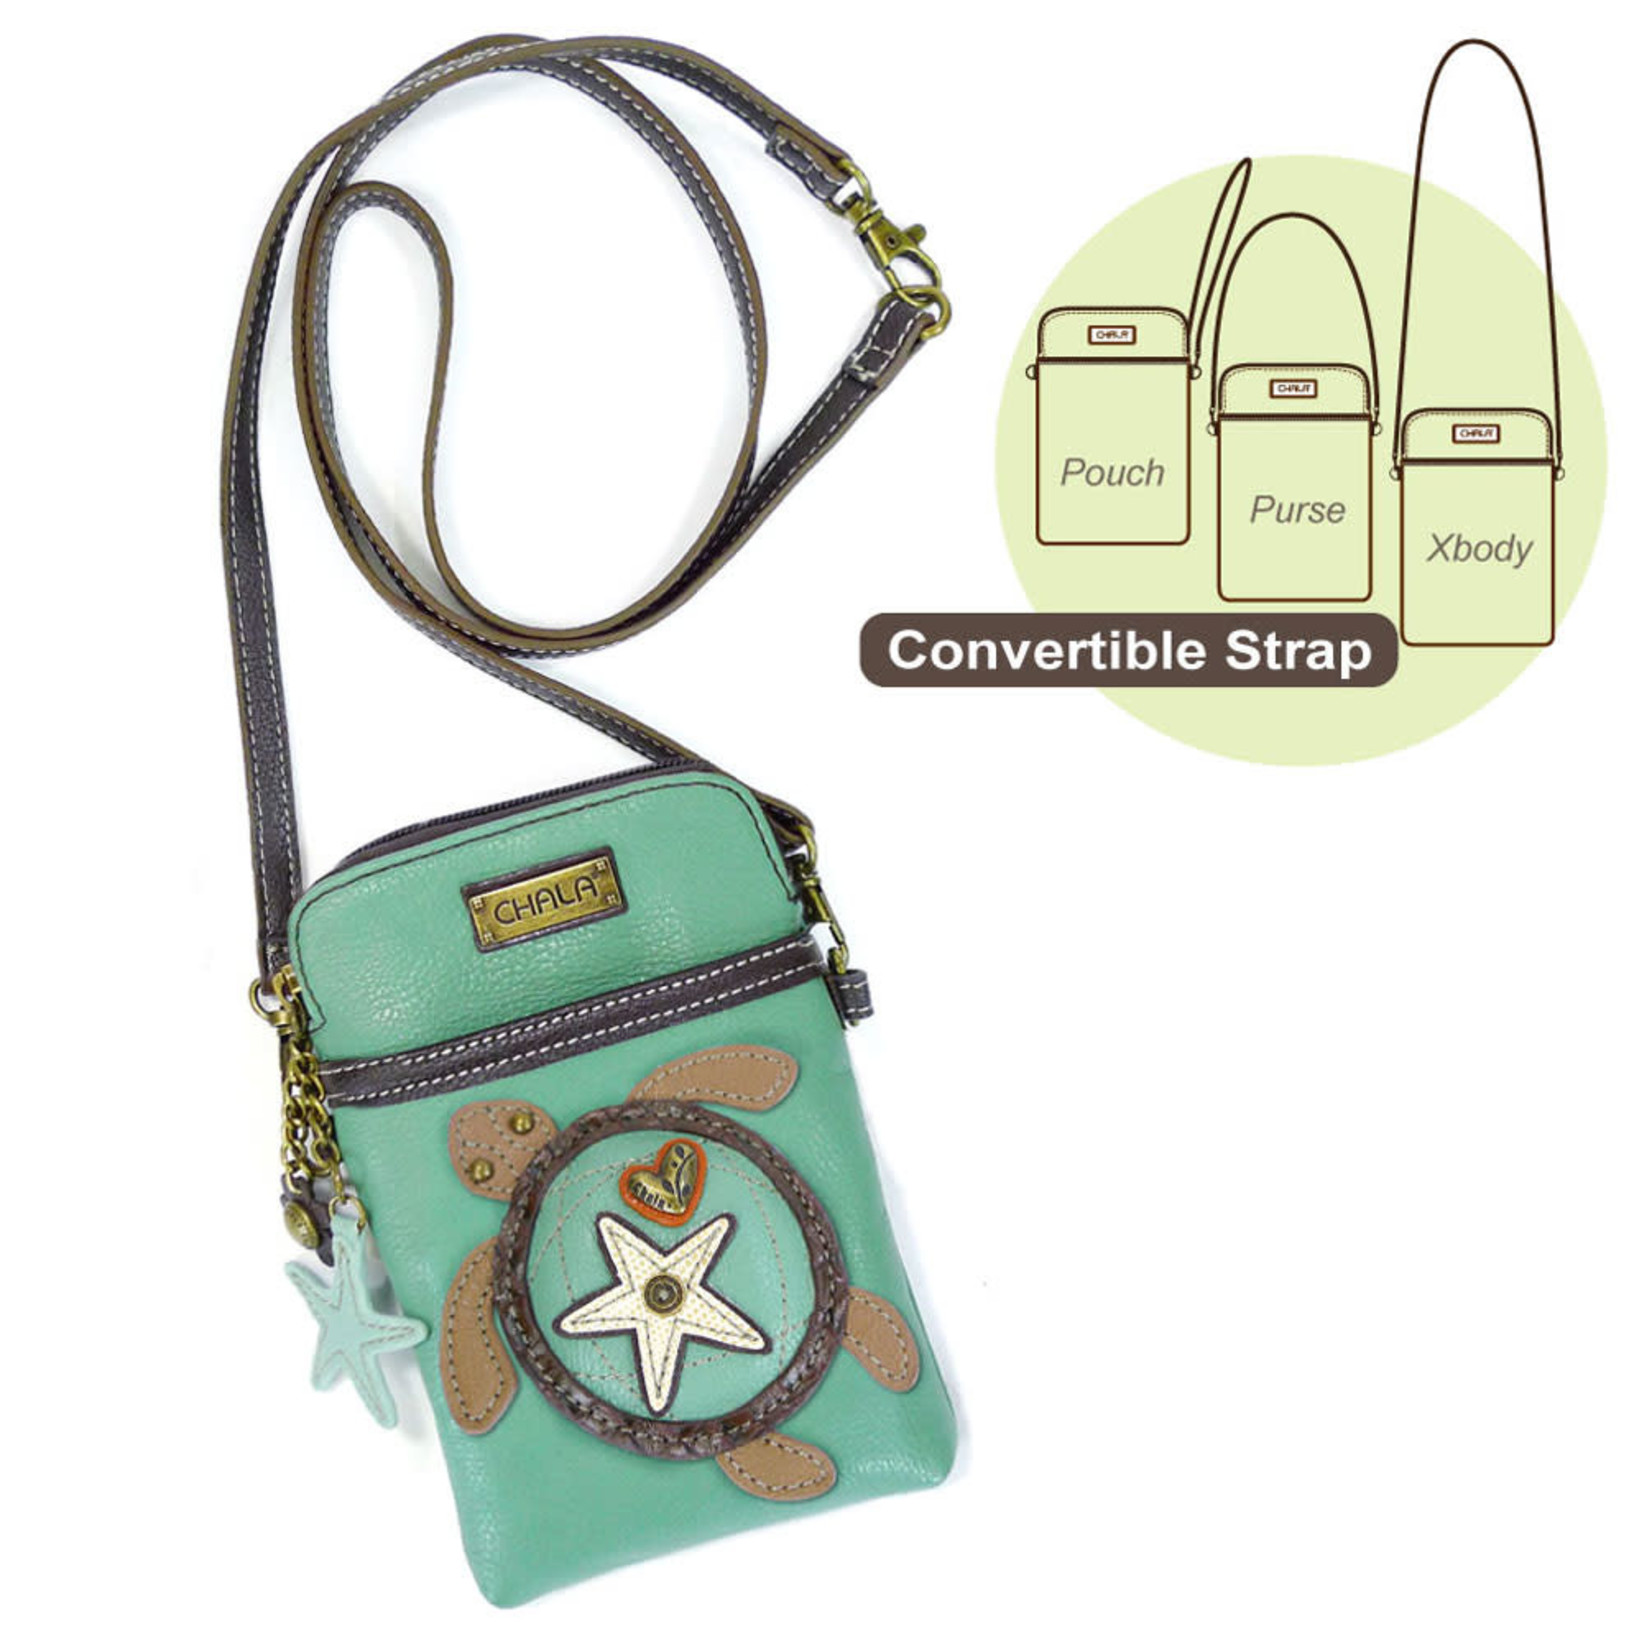 Chala 701TU7 Evolution Cellphone Crossbody Turtle Turquoise - The  Mercantile at Springdale